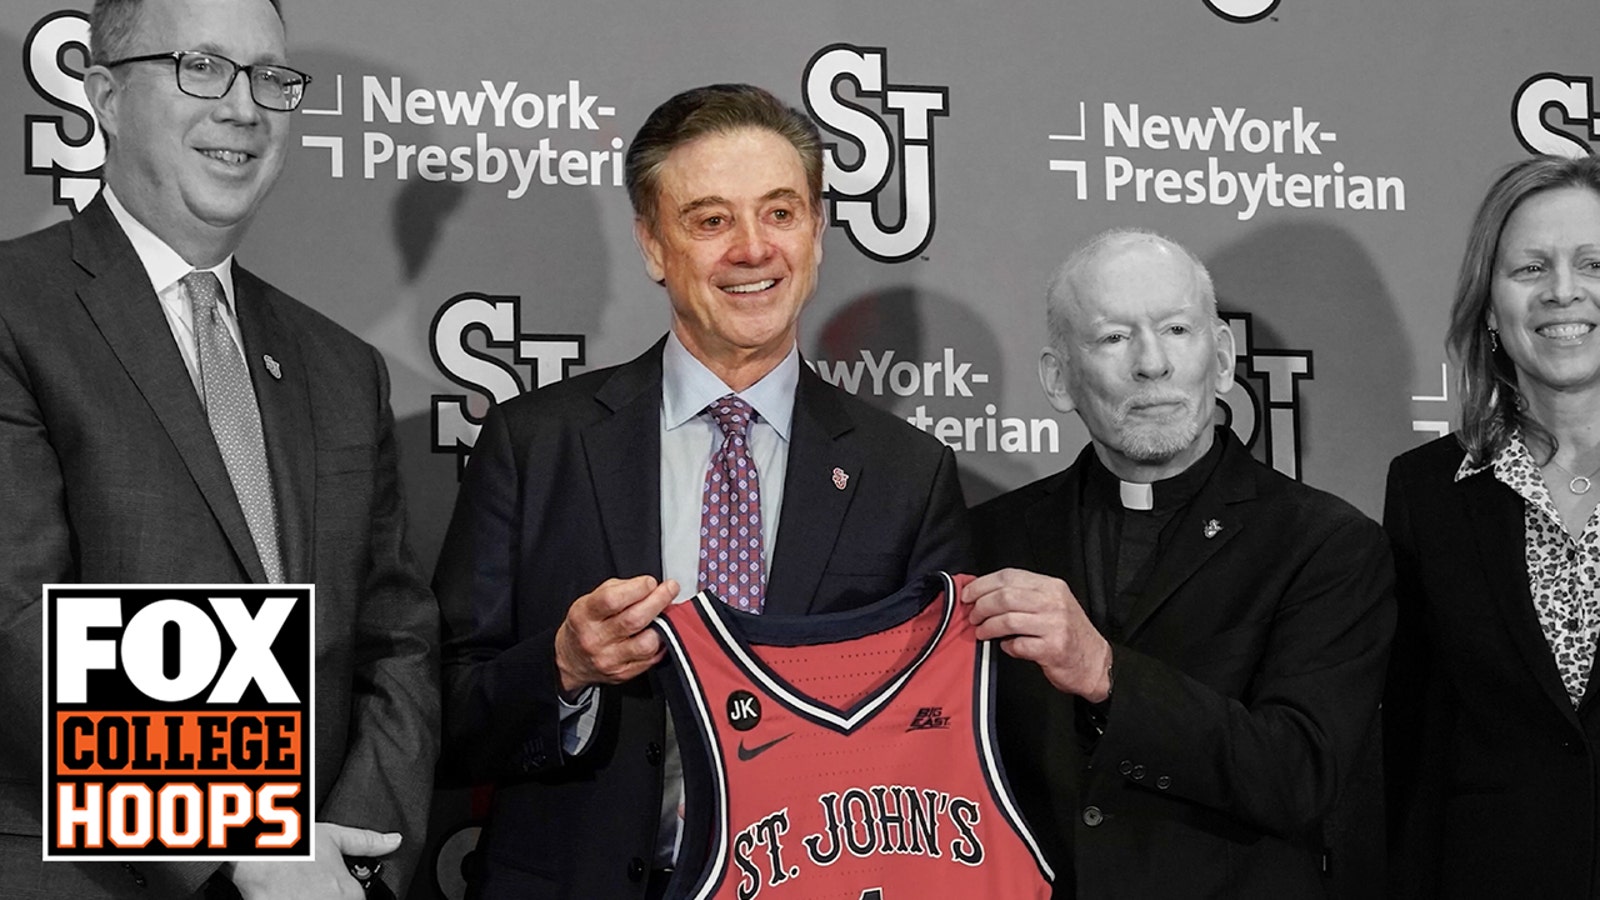 Pitino Chronicles: Rick Pitino on the magnitude of basketball in New York City